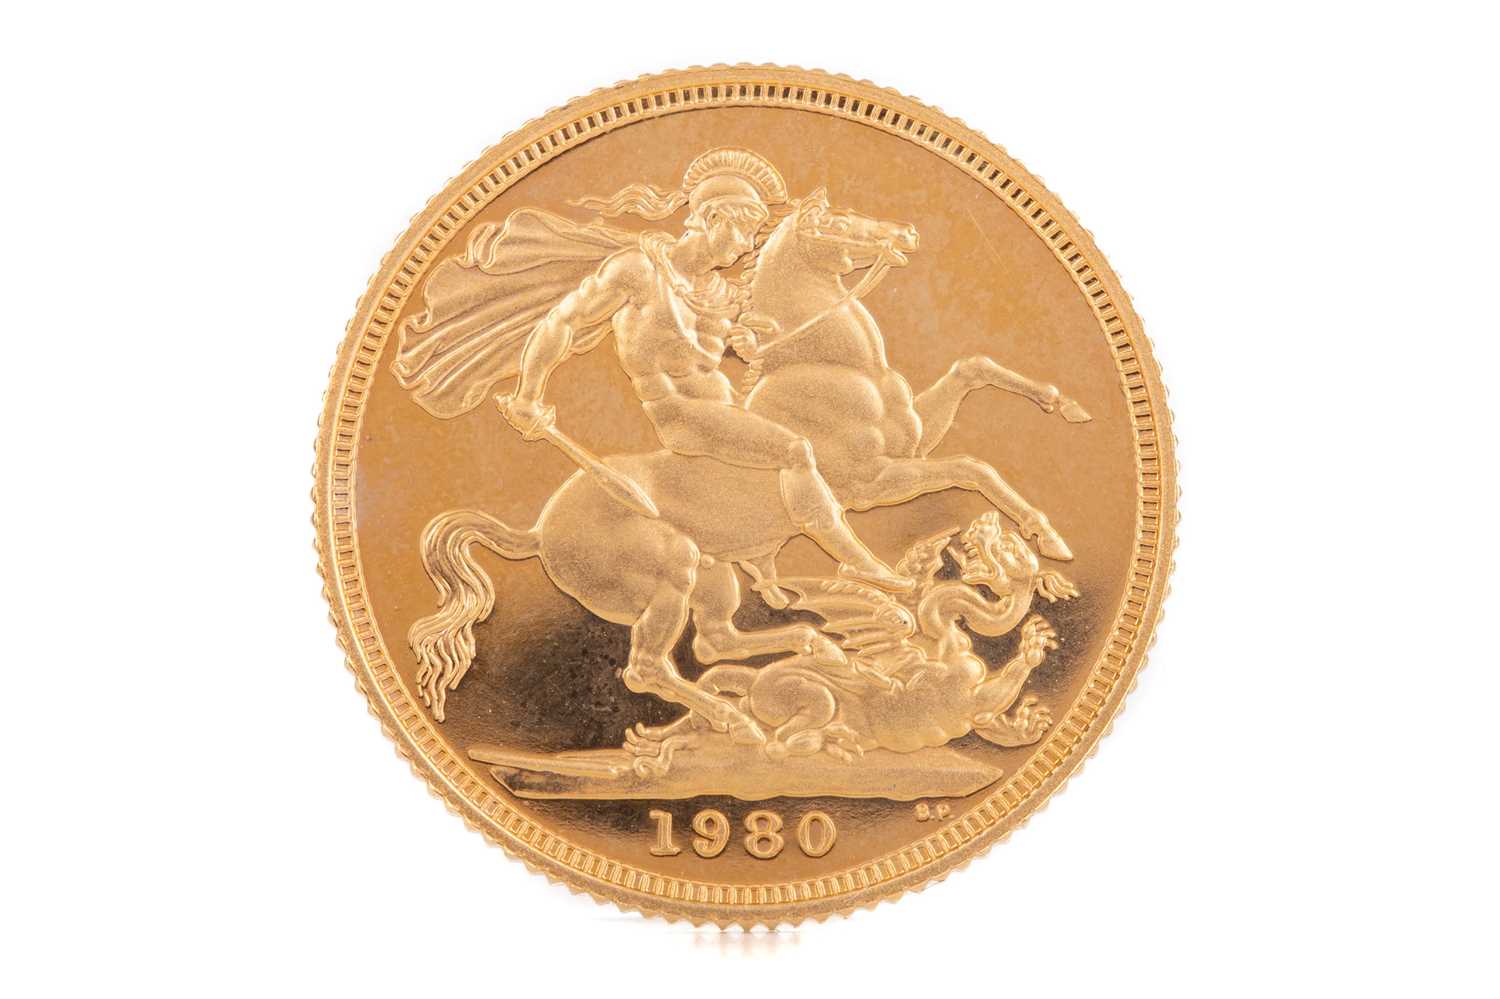 Lot 28 - AN ELIZABETH II GOLD SOVEREIGN DATED 1980